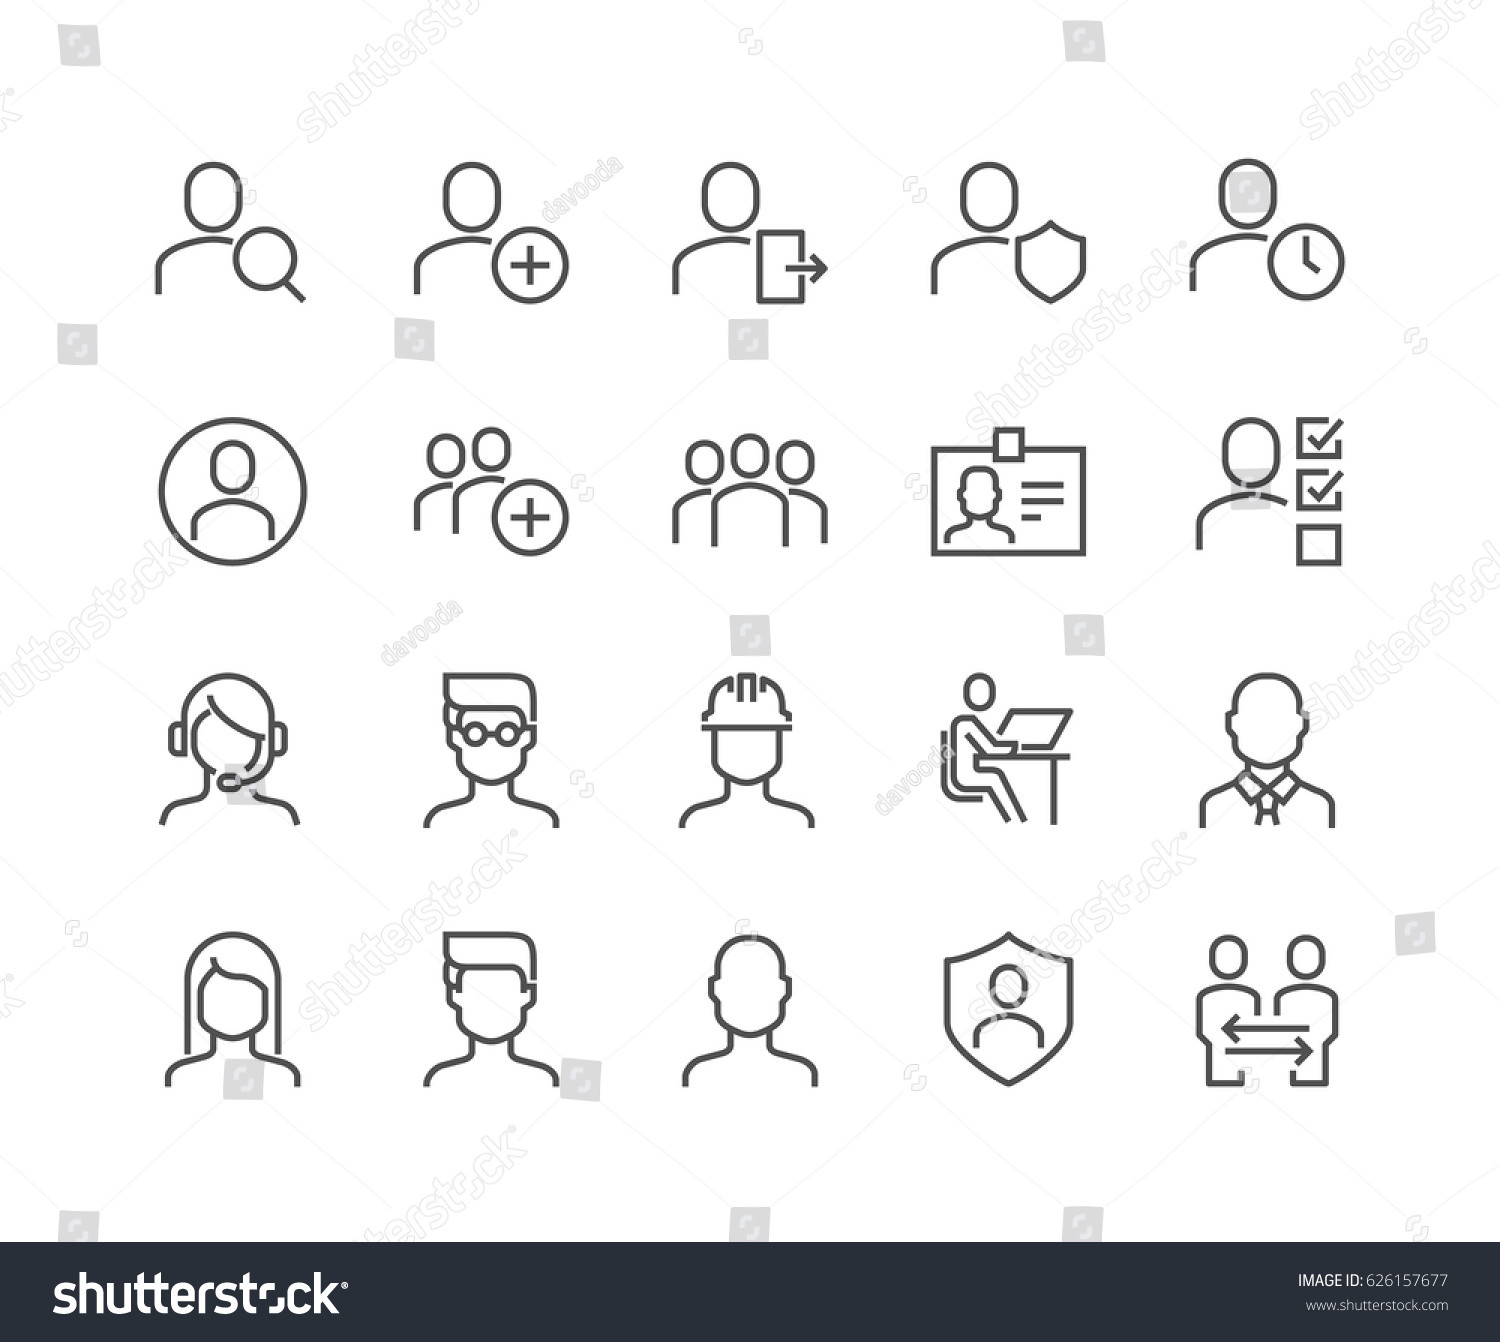 Simple Set of Users Related Vector Line Icons. 
Contains such Icons as Male, Female, Profile, Personal Quality and more.
Editable Stroke. 48x48 Pixel Perfect. #626157677